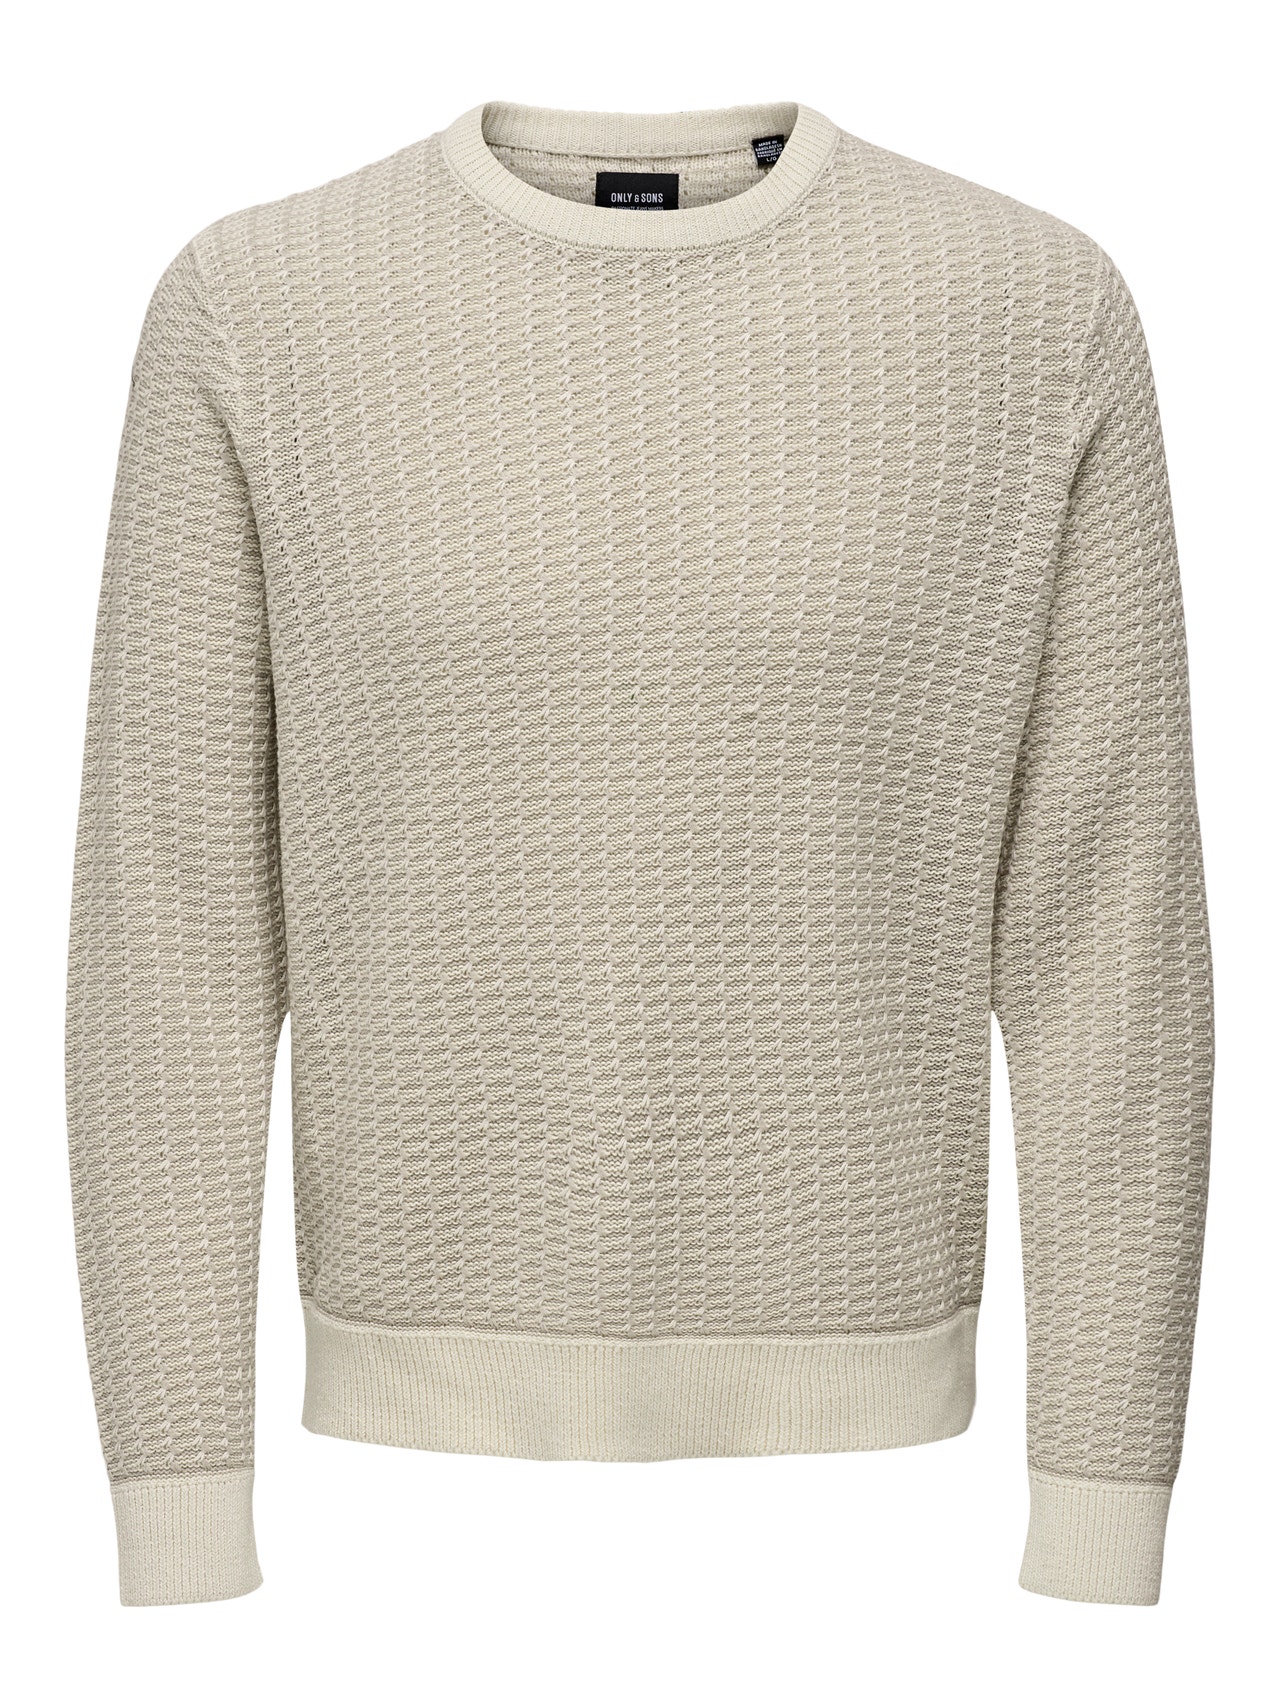 ONLY & SONS Crew neck Pullover -Antique White - 22026506